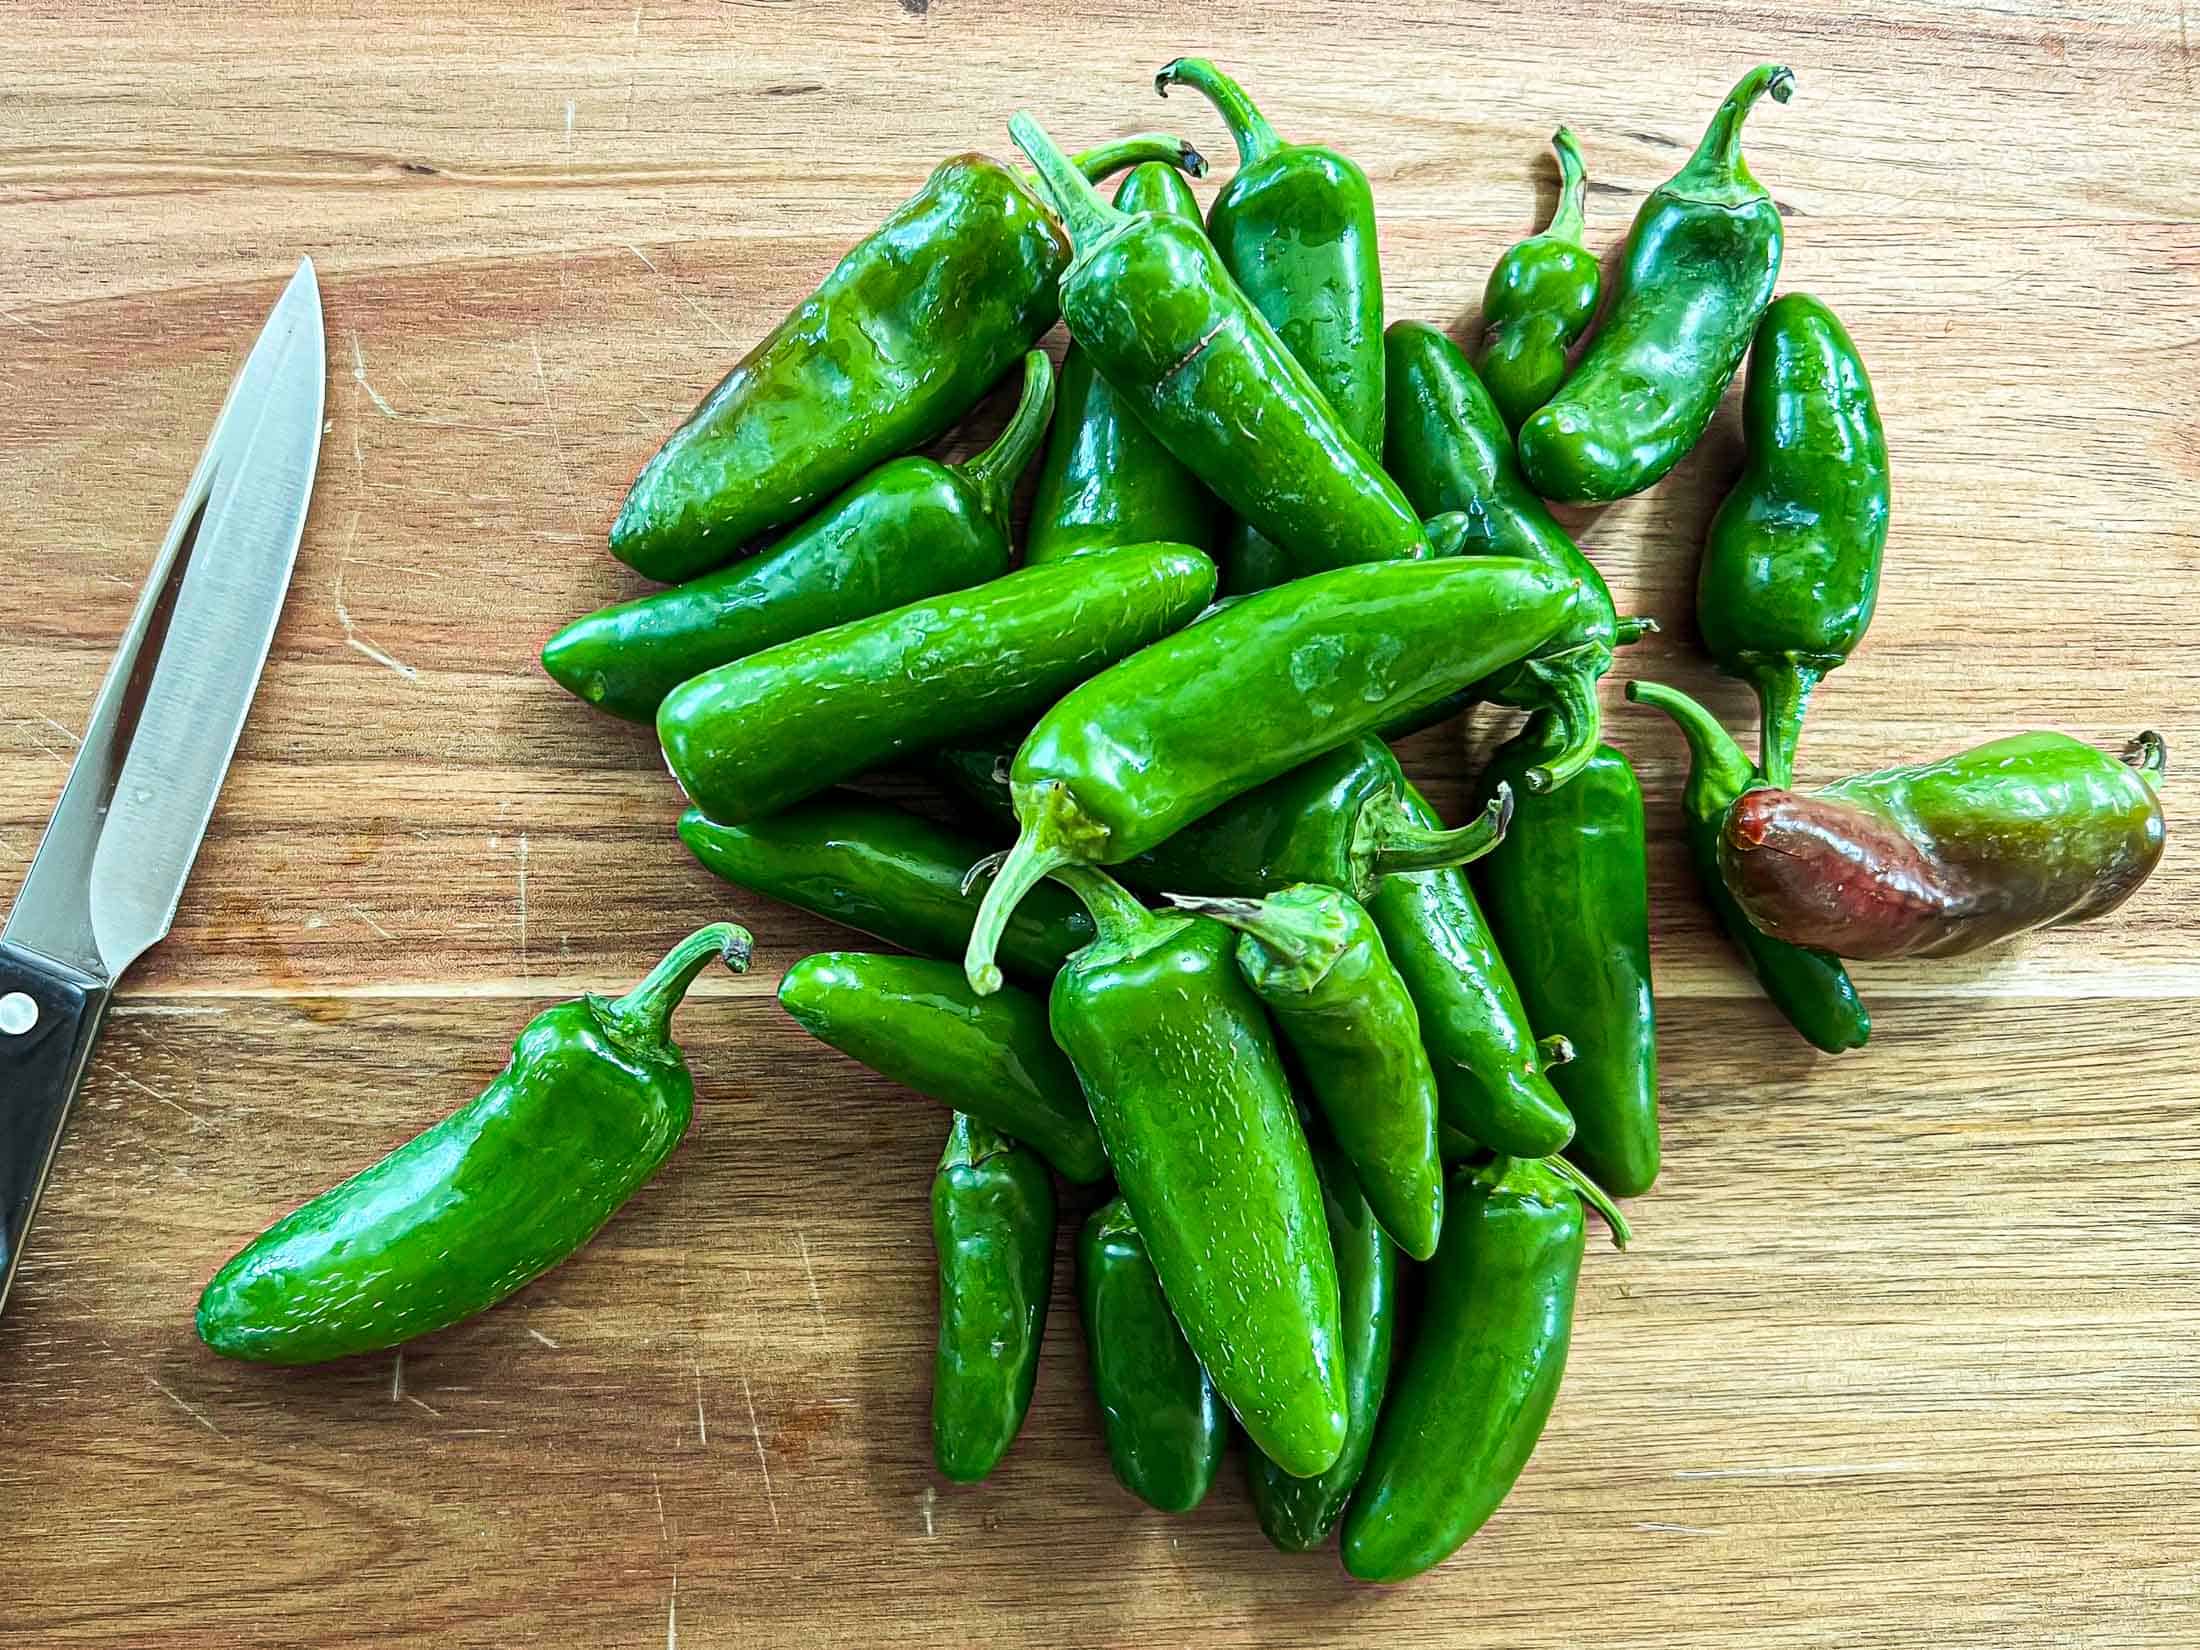 Jalapeno peppers on a wooden cutting board with a sharp knife.